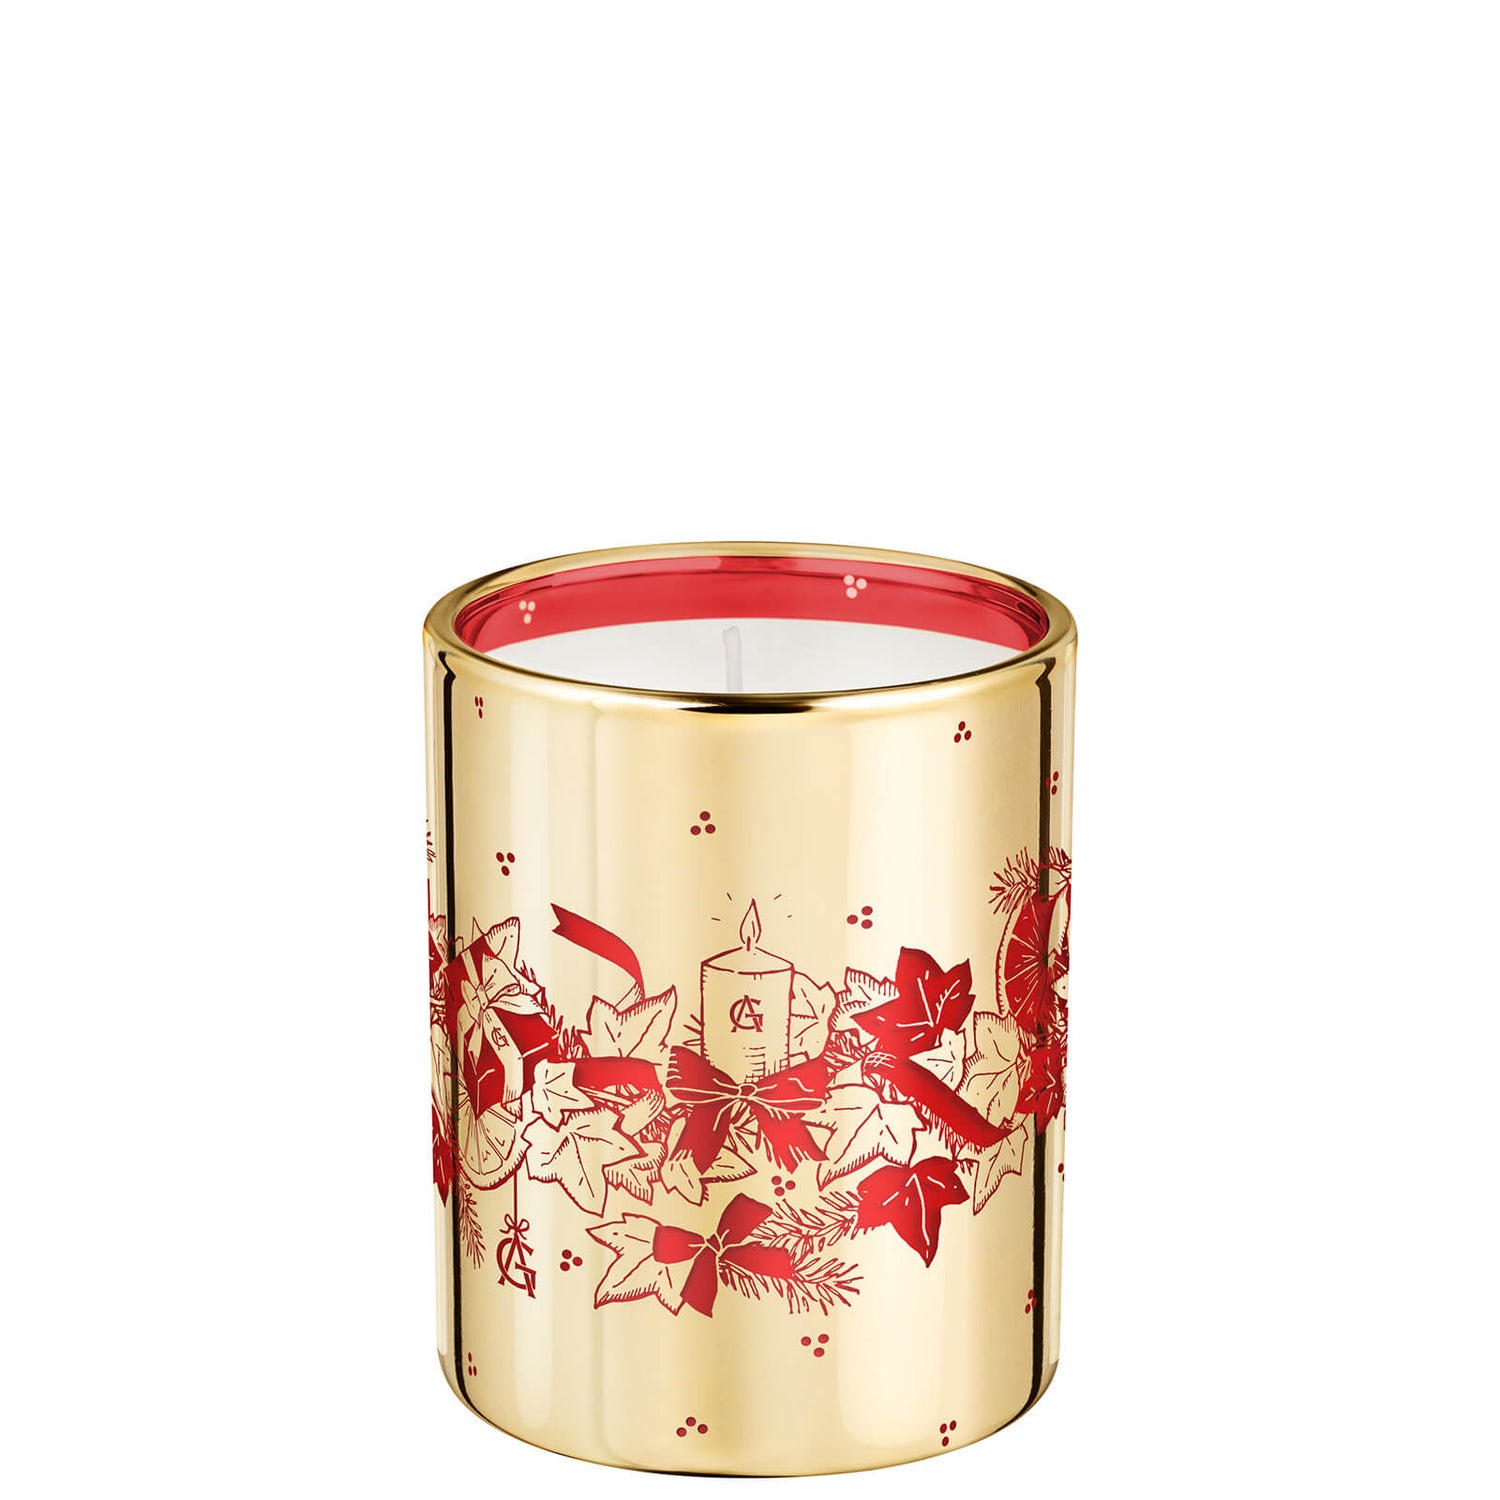 Goutal Une Foret d'Or 限量版蜡烛300克